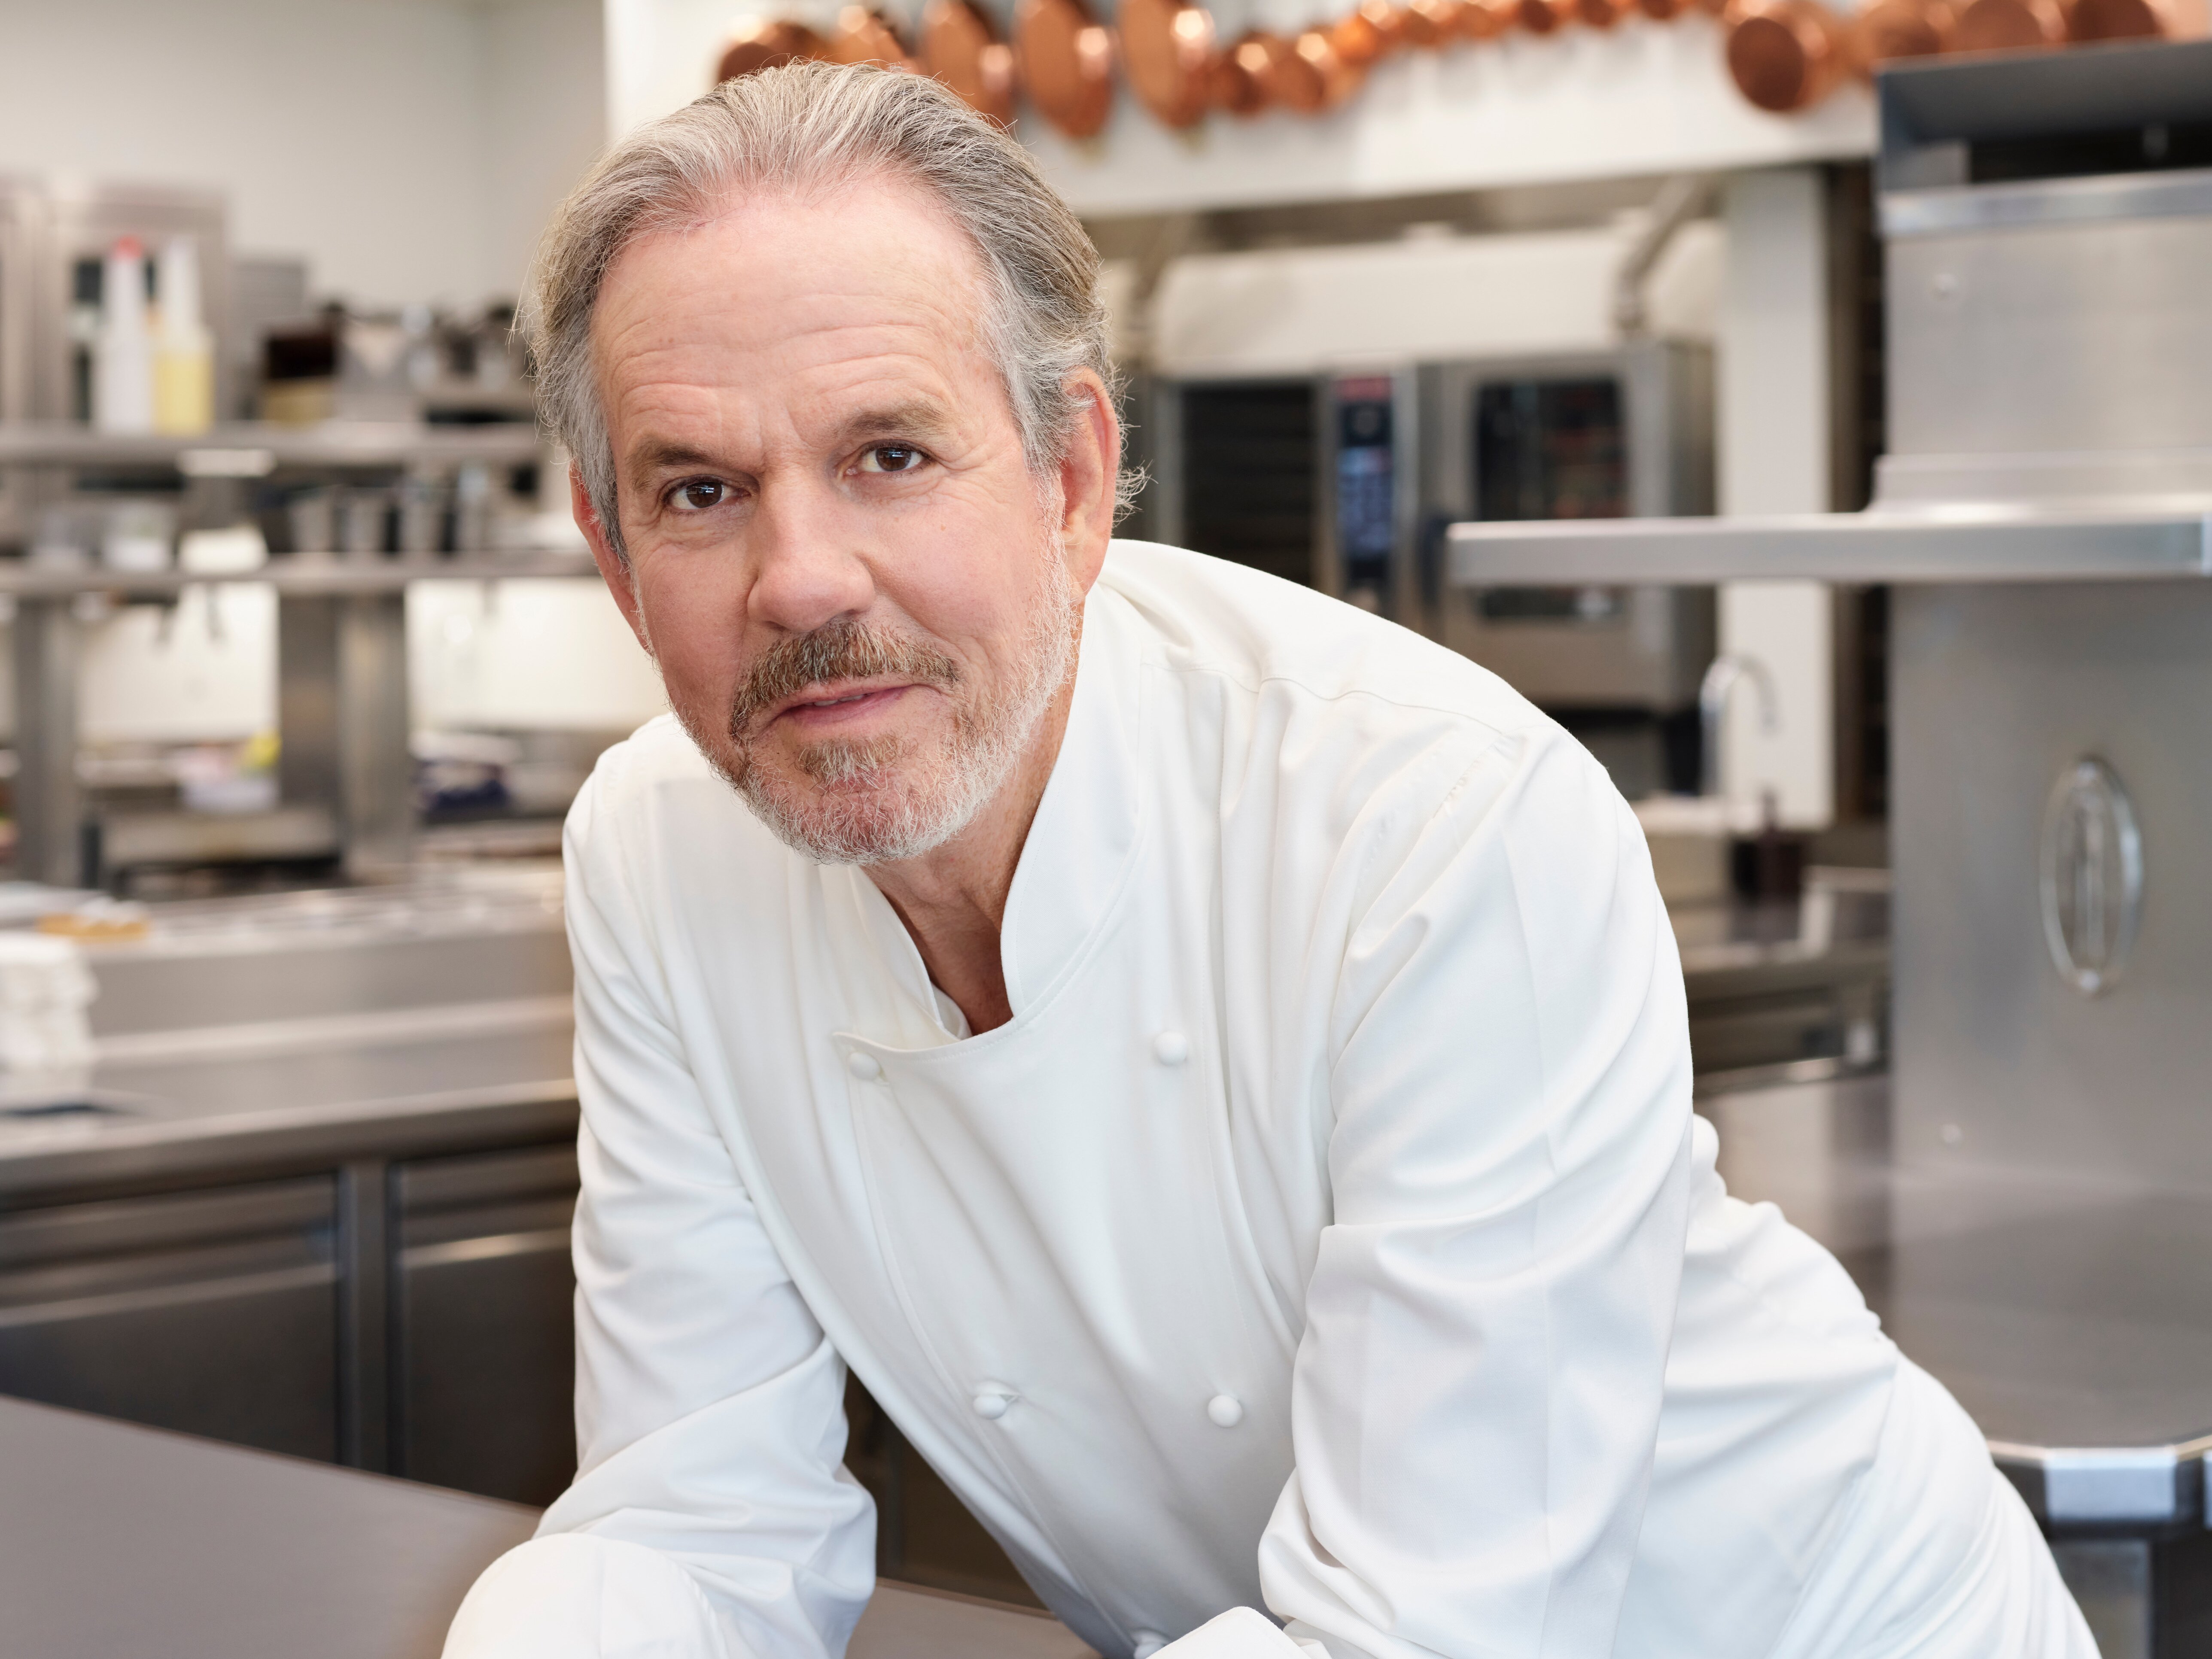 Thomas Keller on why fine dining will survive the pandemic